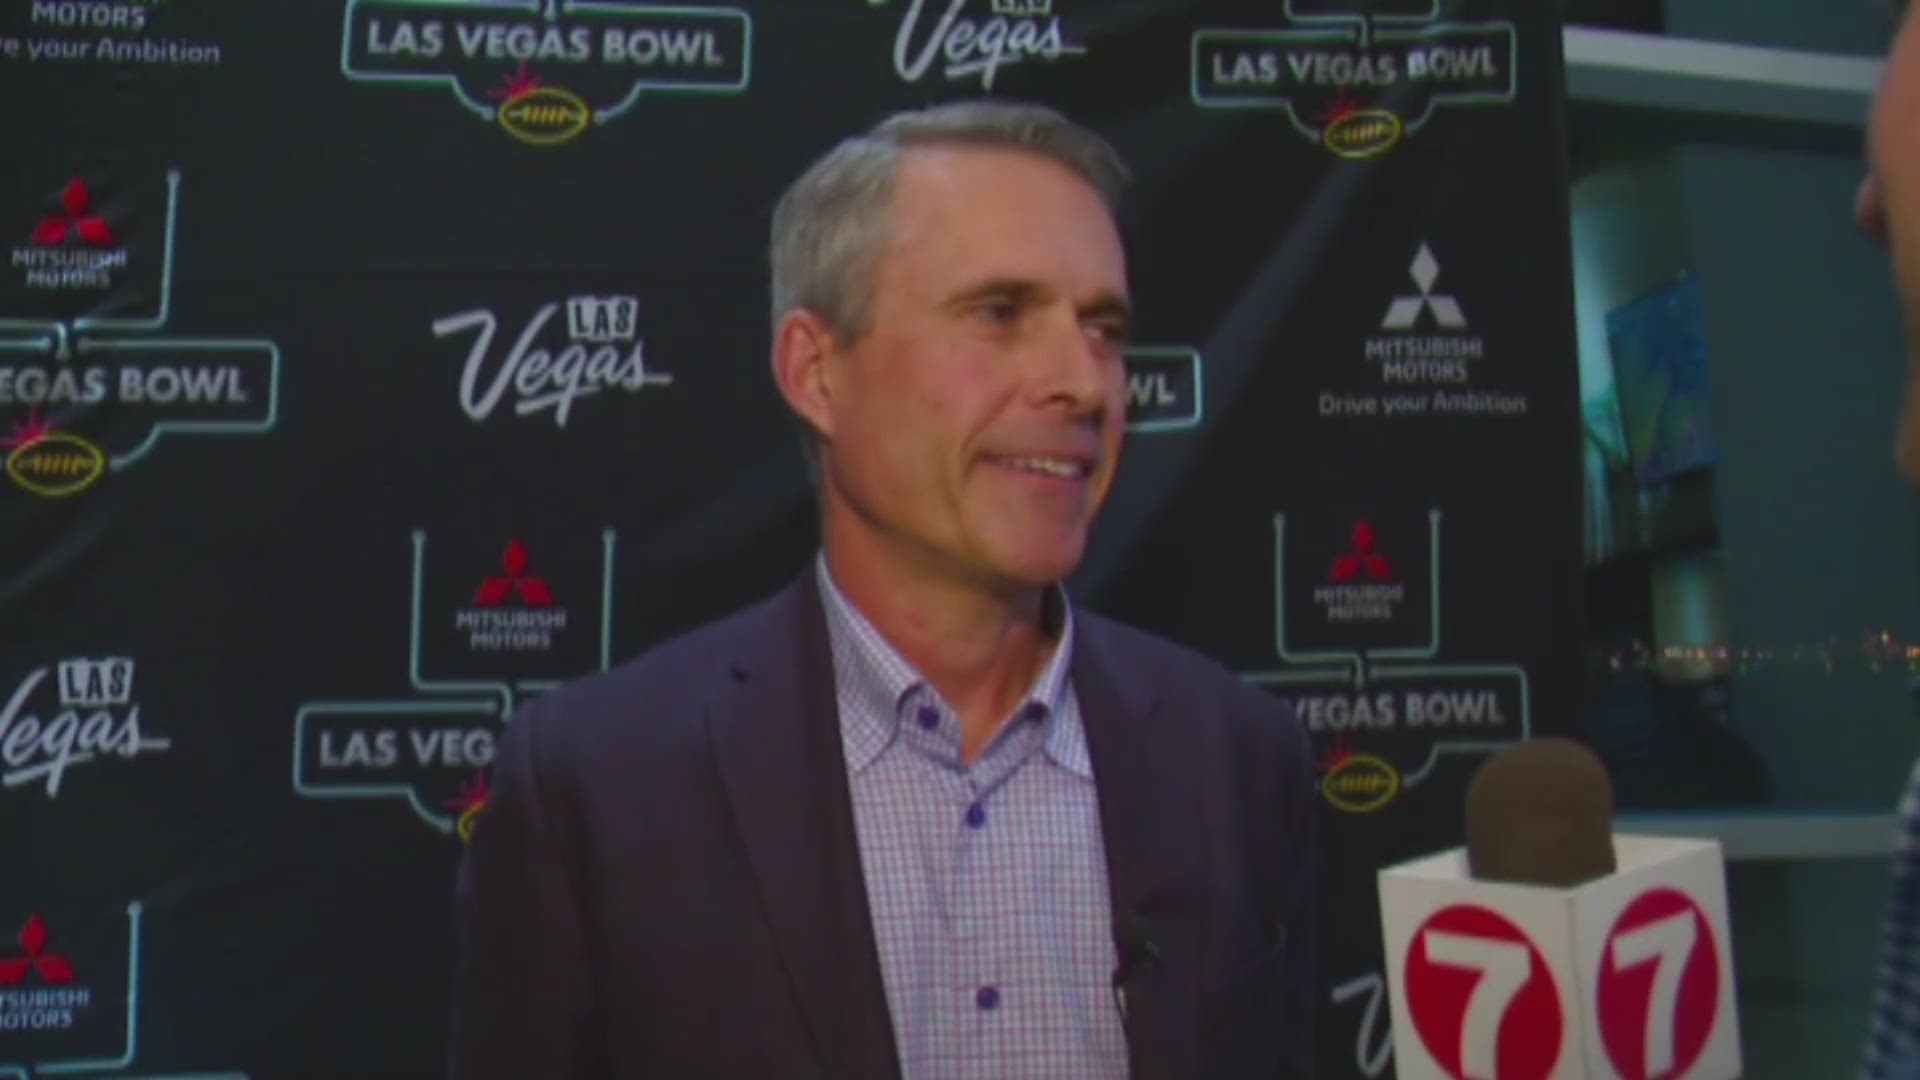 Coach Chris Petersen spoke with the media on Tuesday ahead of this weekend's Las Vegas Bowl.